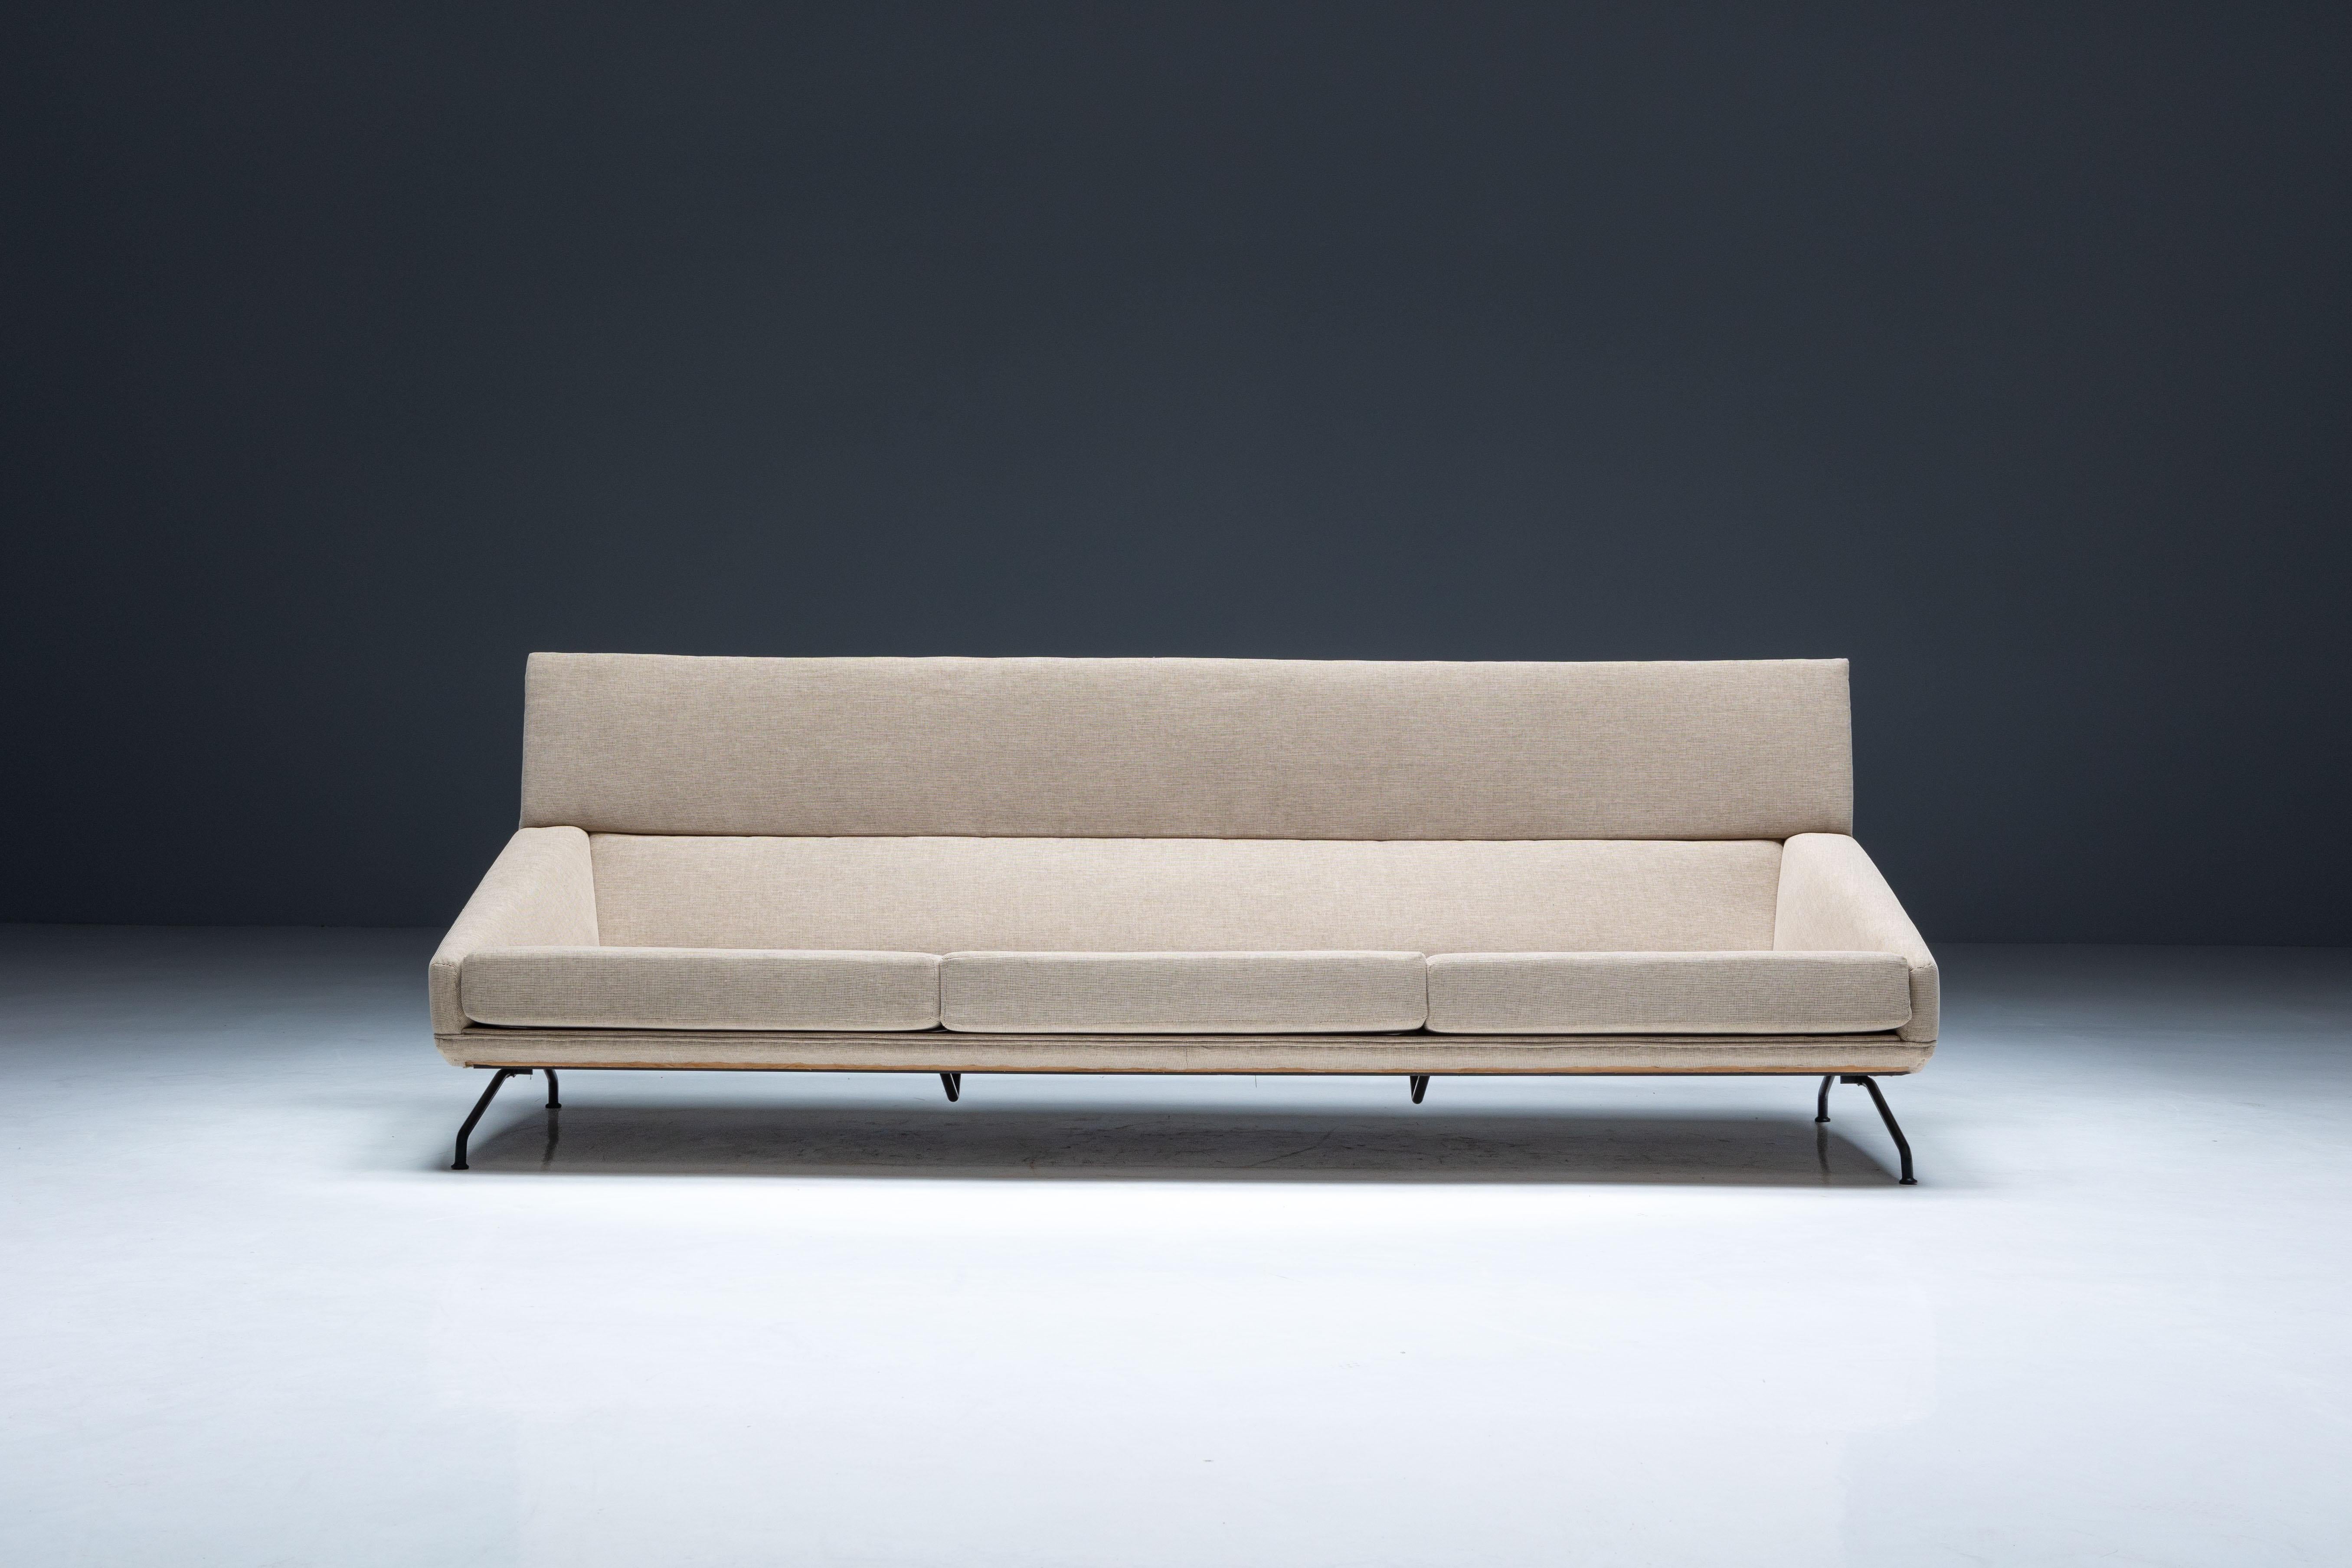 Three-seater sofa designed by Georges van Rijck and manufactured by Beaufort in Belgium. This piece merges the timeless design aesthetics of 1960s Belgium with contemporary elegance. Adorned with premium fabric upholstery, it exudes sophistication,